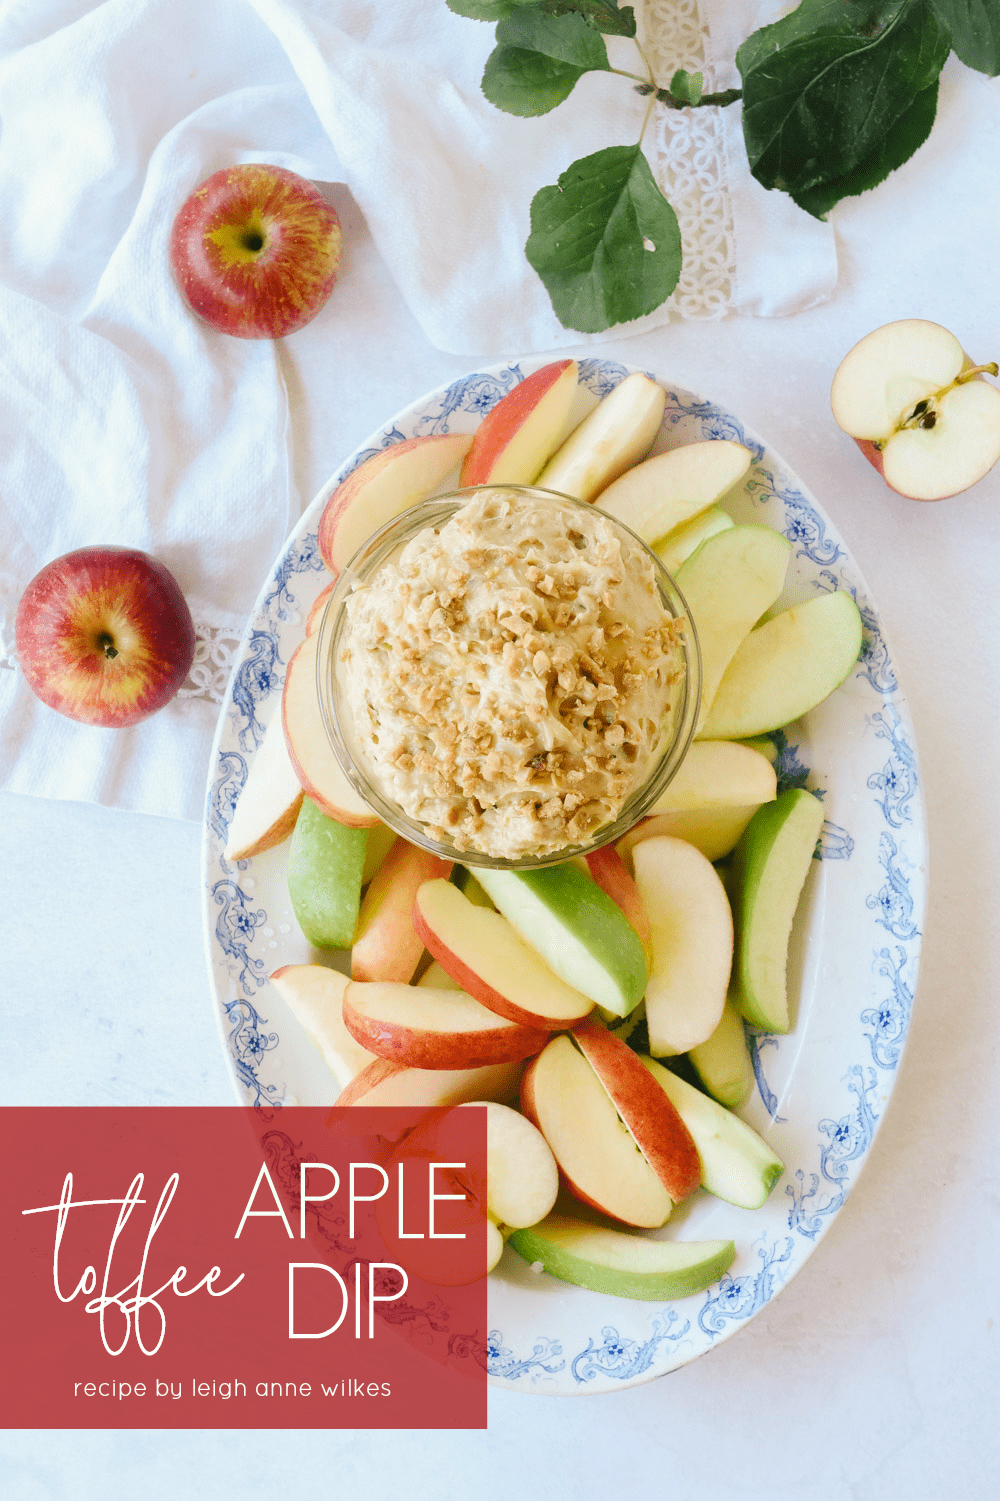 apple toffee dip on a platter with apples